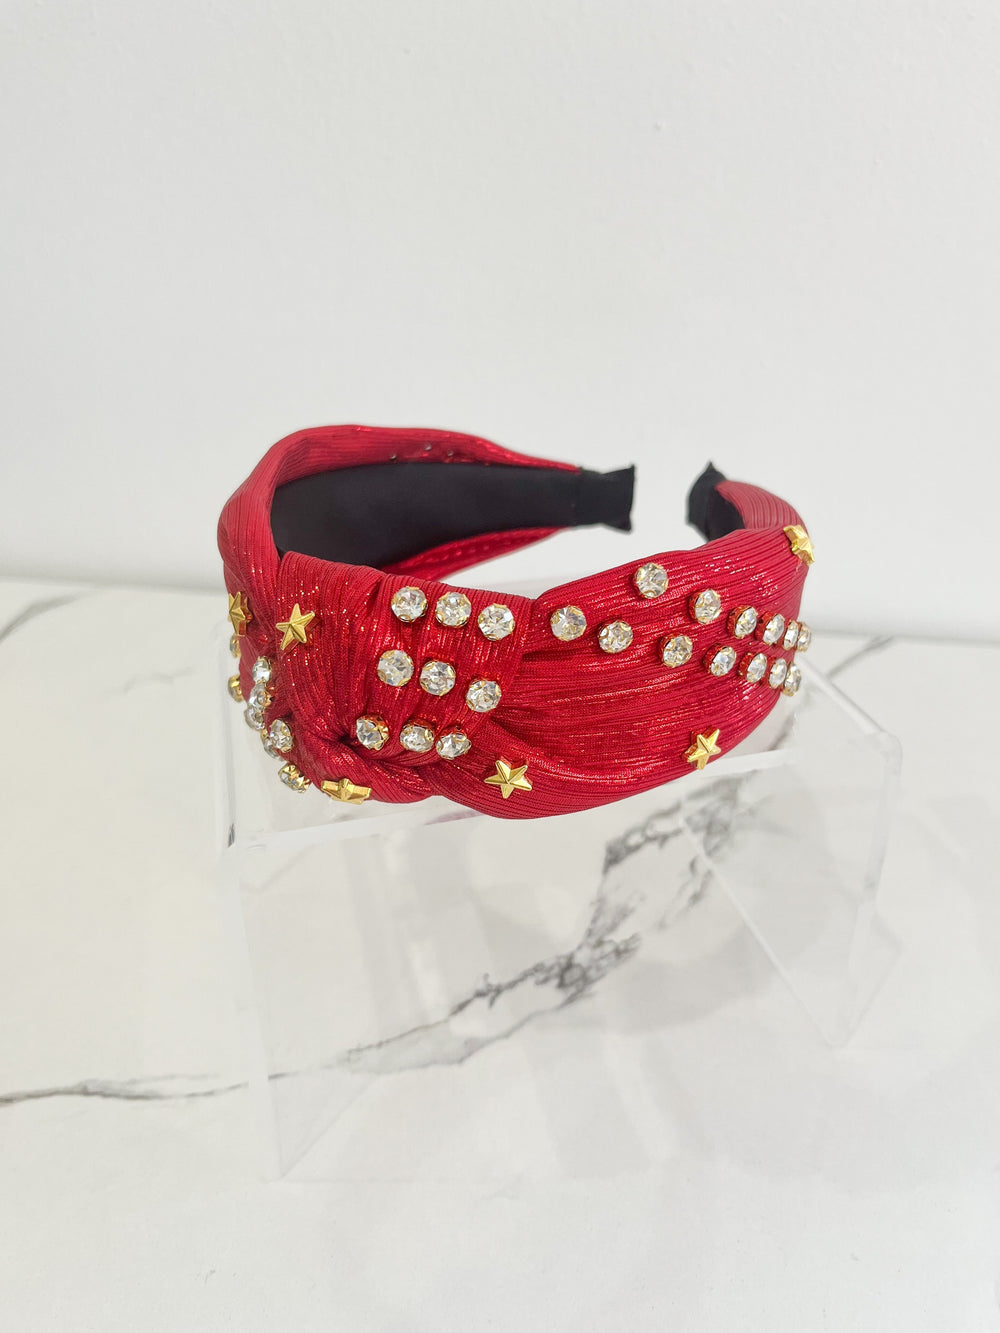 WS 600 Accessories - Star Spangled Red Studded Headband